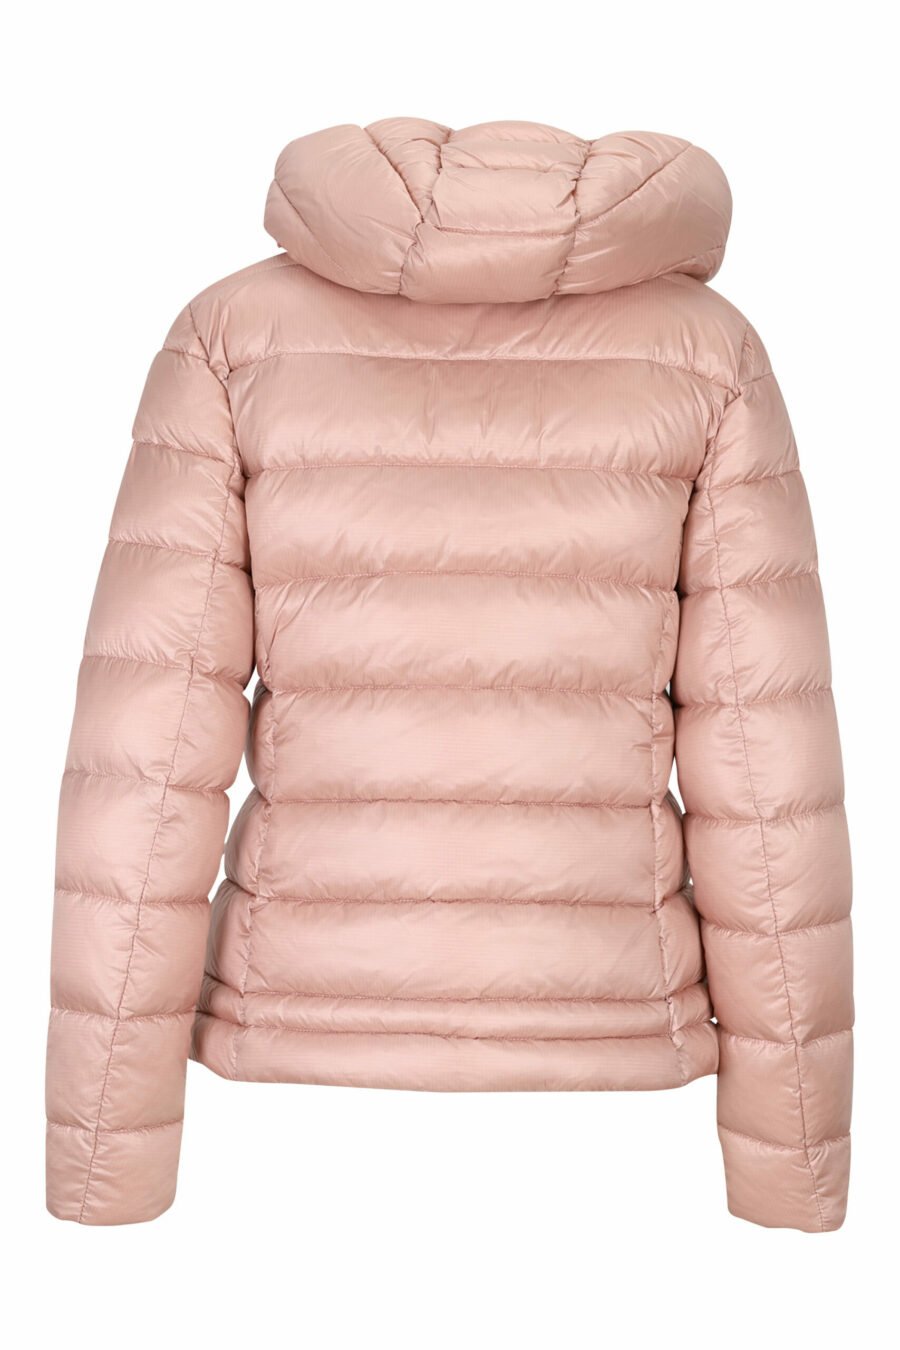 Pale pink straight lined hooded jacket with purple inside with logo patch - 8058610675660 3 scaled